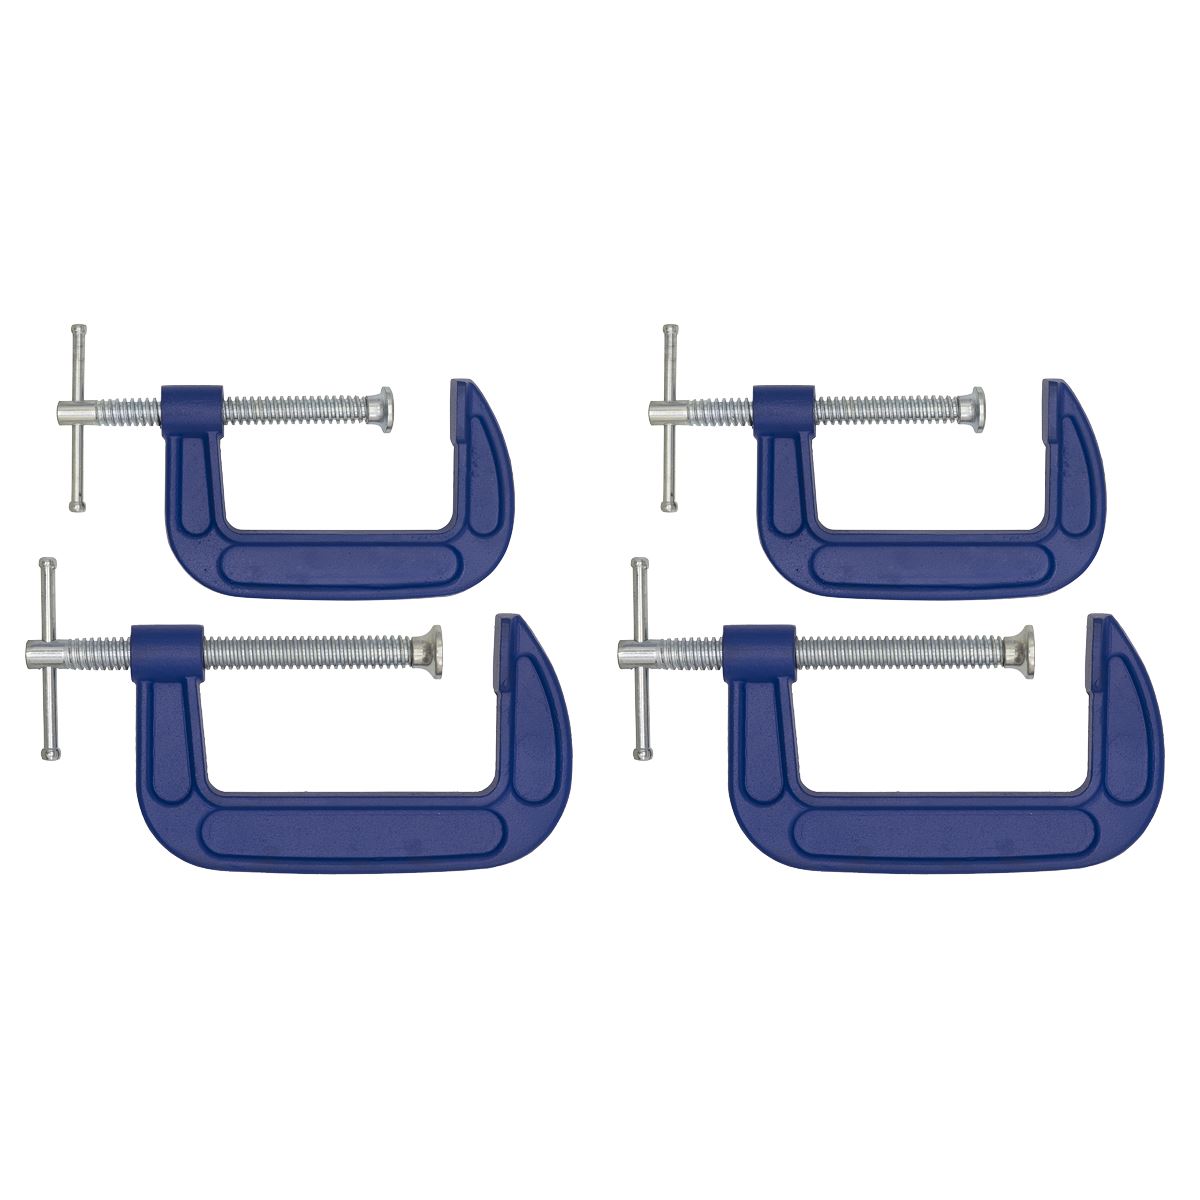 Sealey G-Clamp Set 75mm & 100mm - 4pc